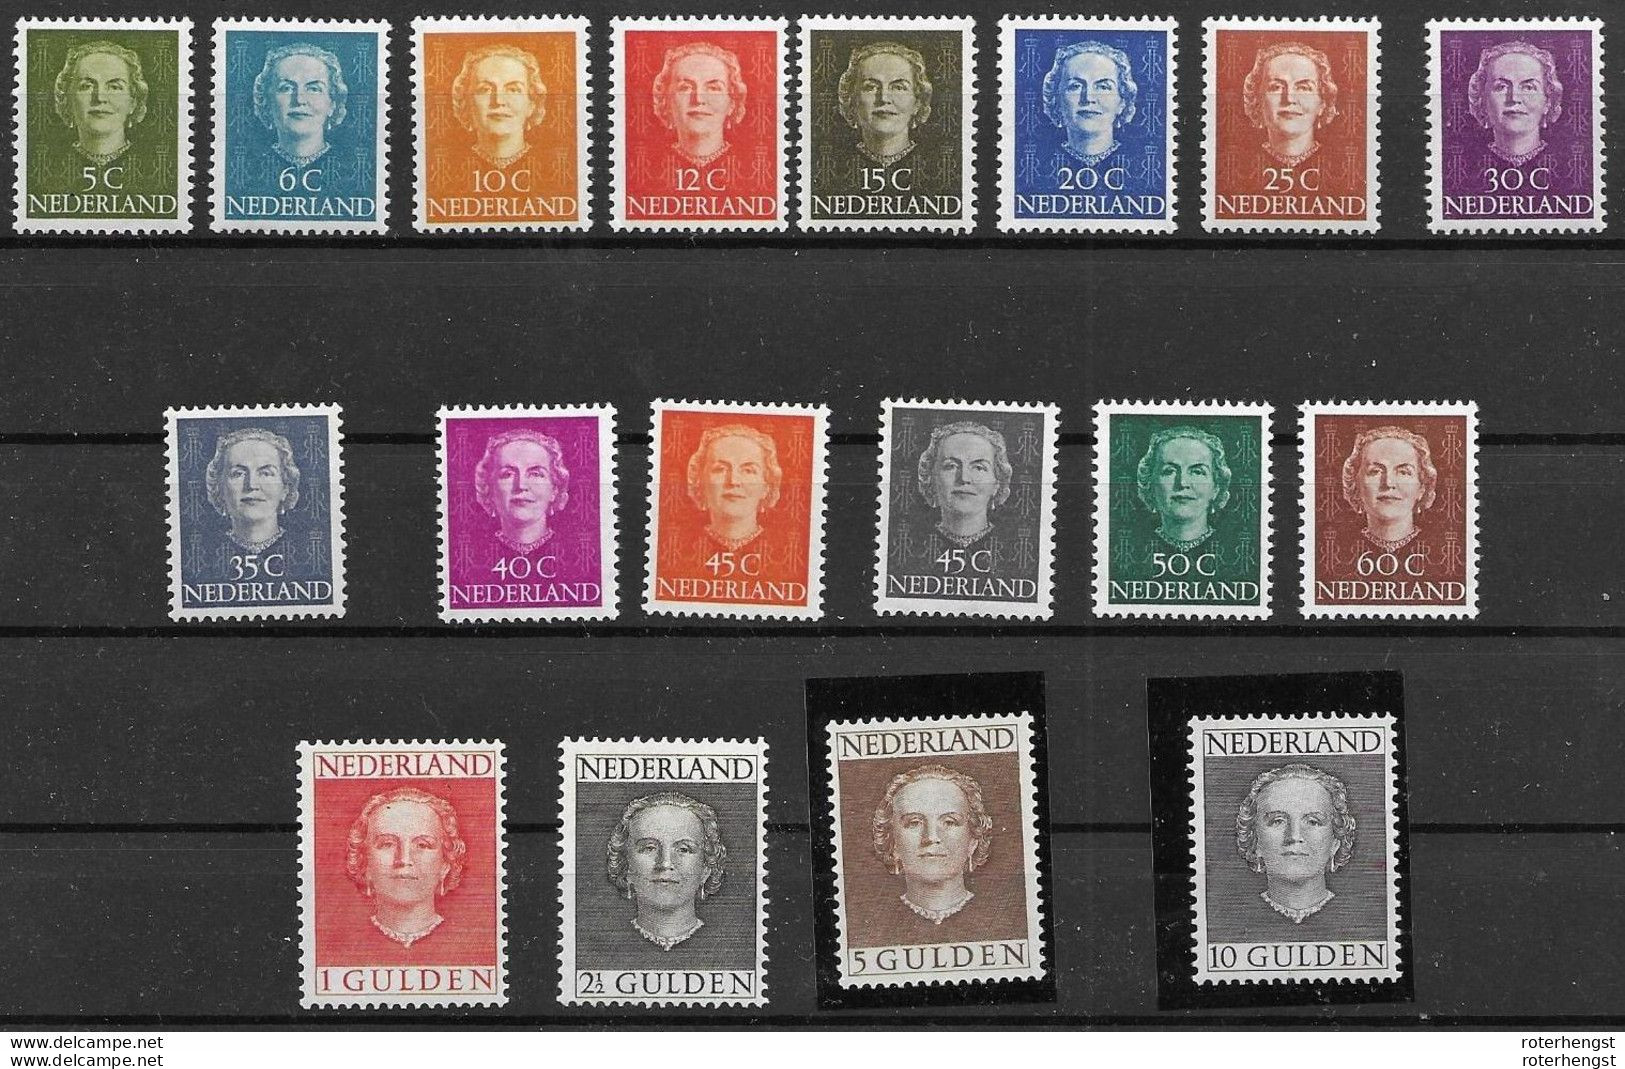 Netherlands 1250 Euros Mnh ** All Very Clean Original Gum, Only 10G Has Quasi Invisible 0,5cm Hinge Trace - Nuevos